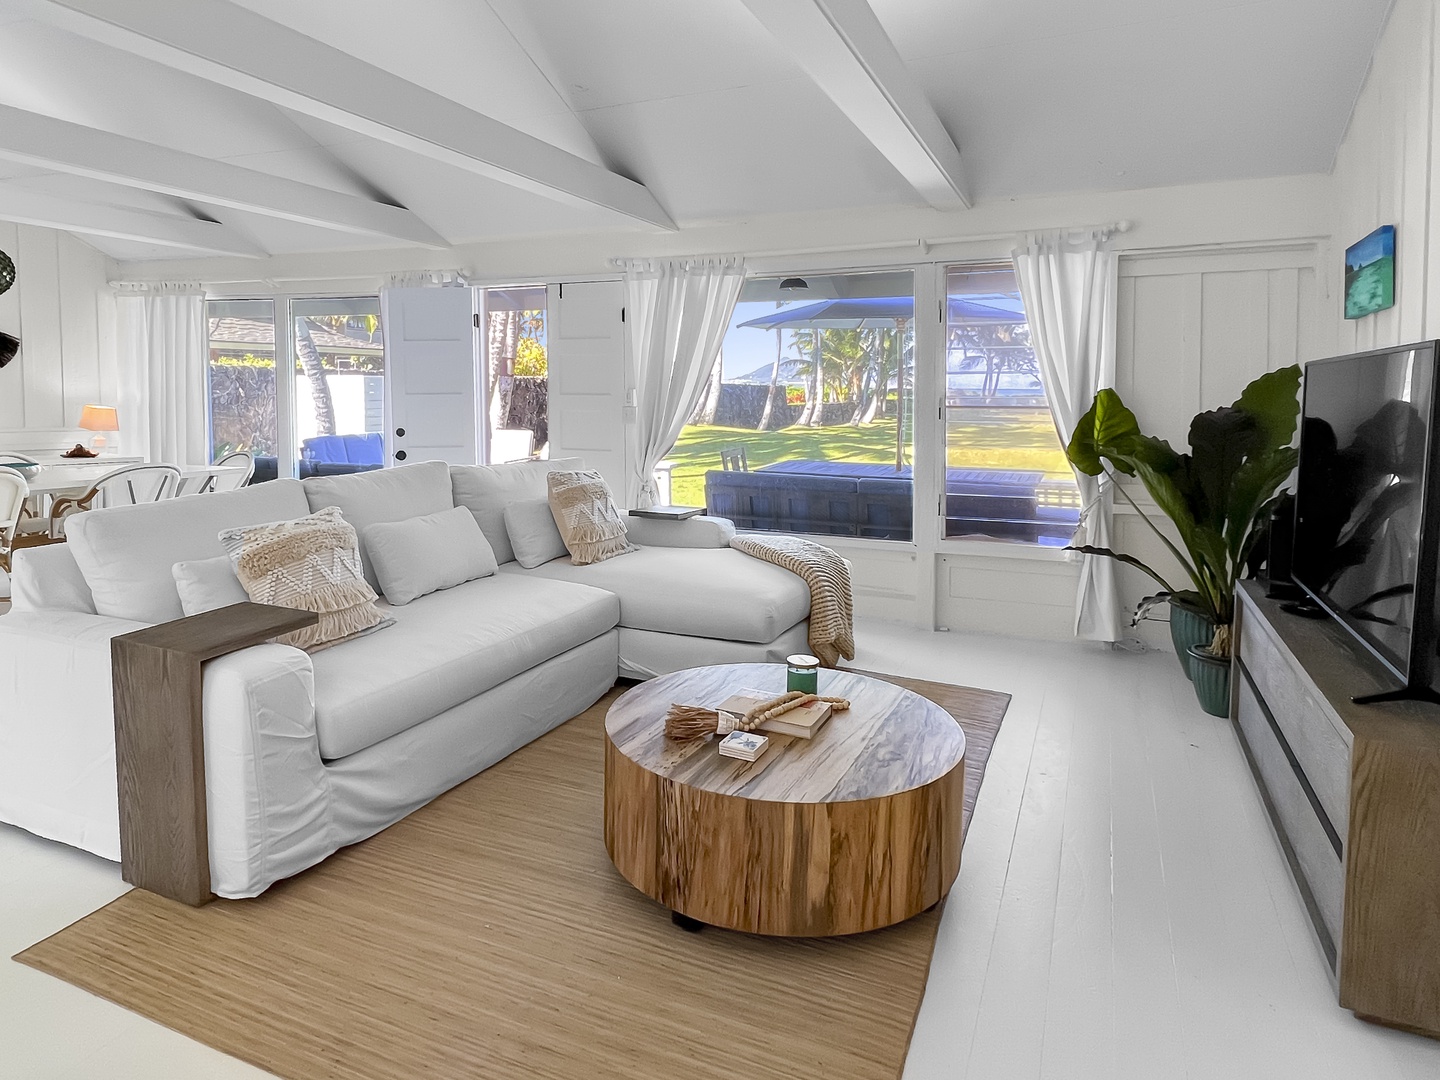 Kailua Vacation Rentals, Kai Mele - Cozy living room with all new furniture!